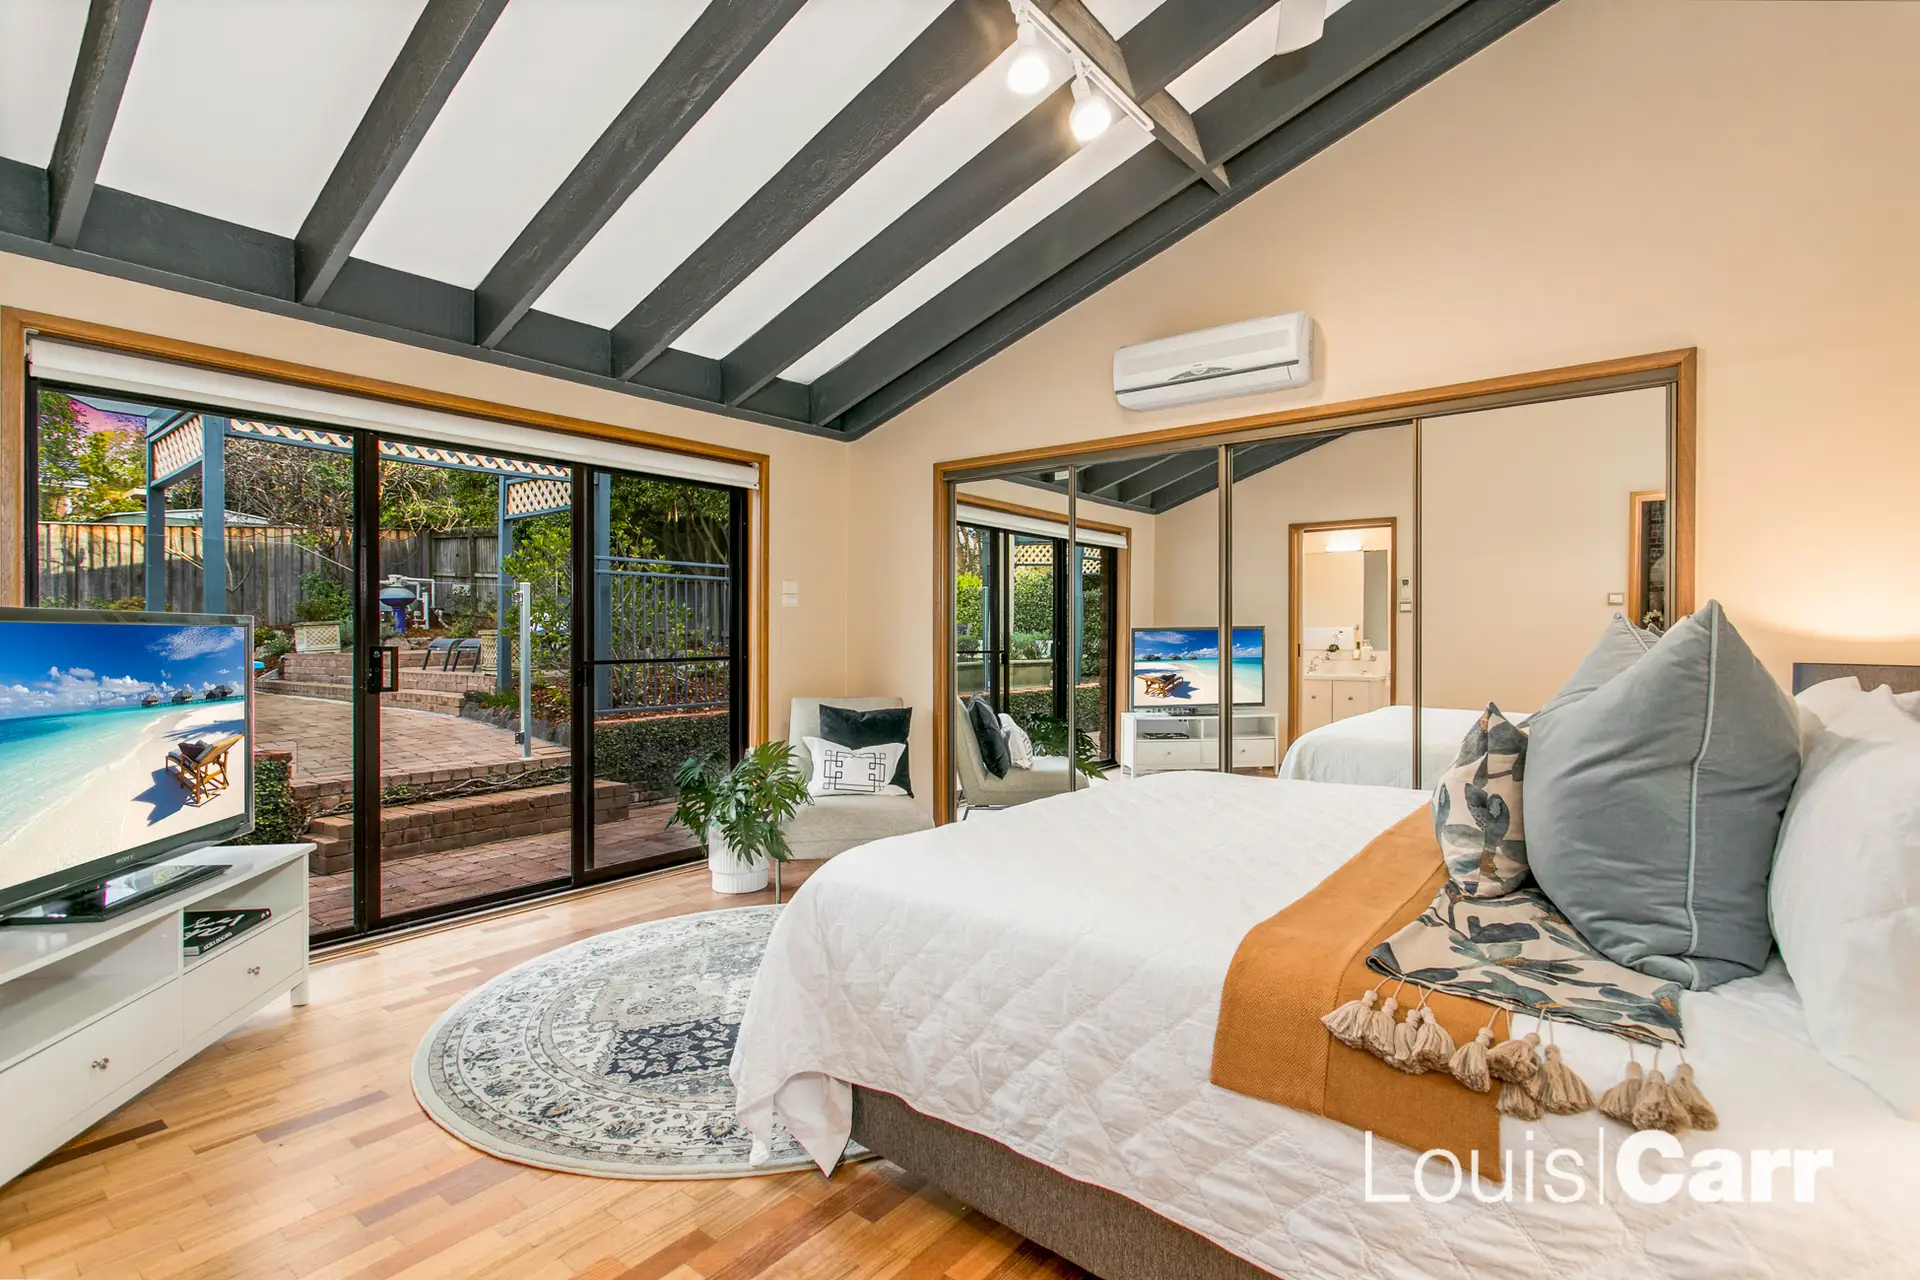 Photo #7: 47 Range Road, West Pennant Hills - Sold by Louis Carr Real Estate